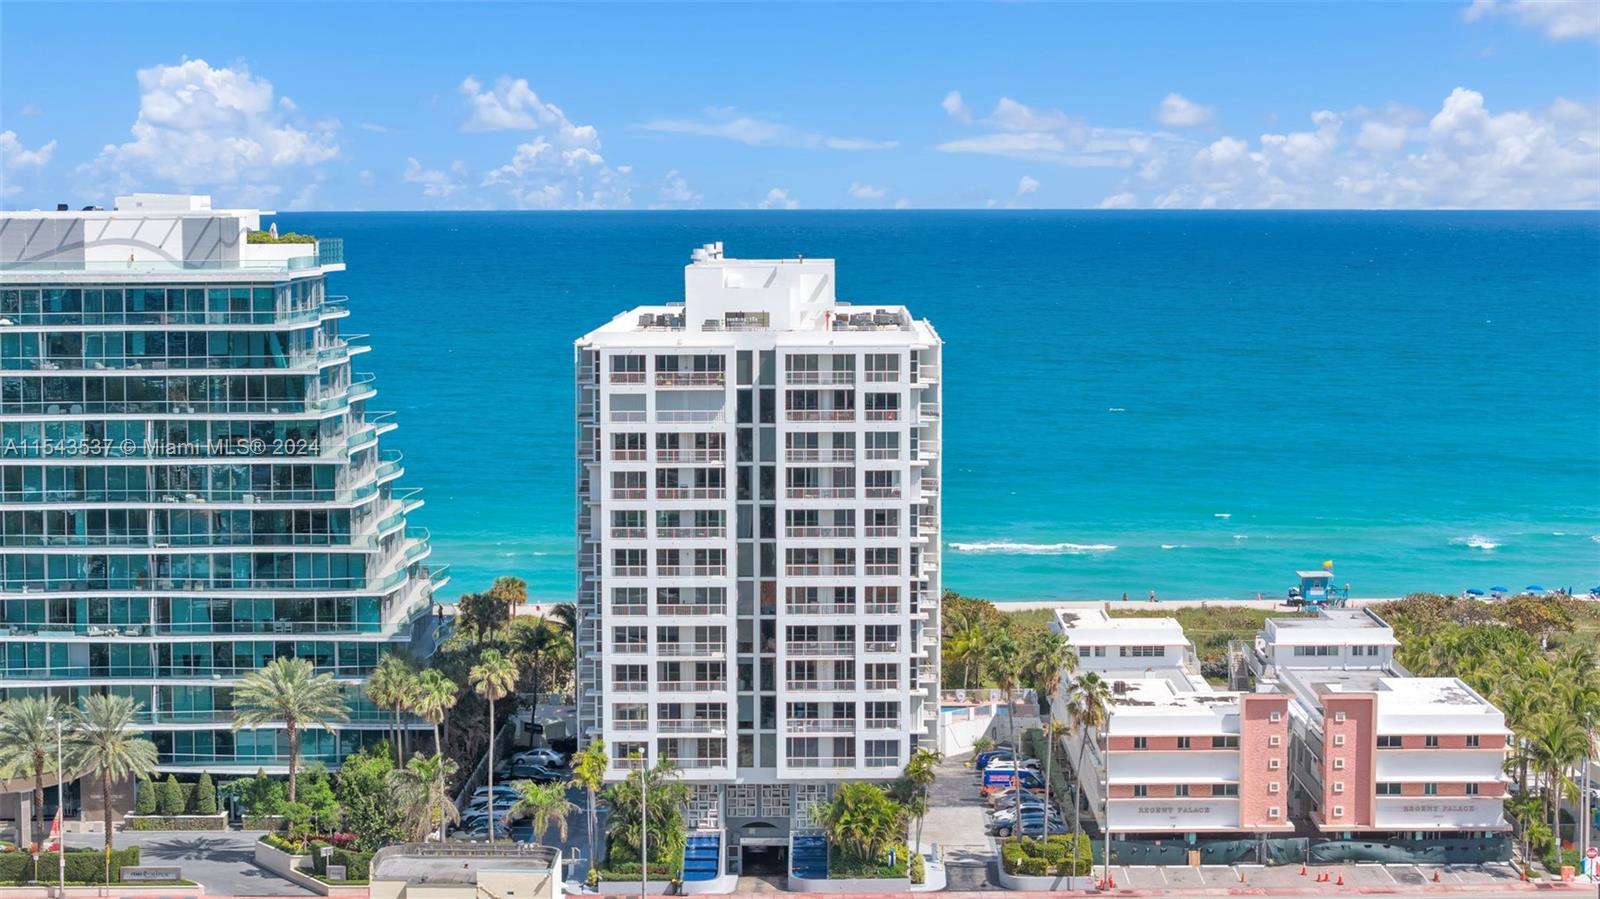 Photo of 9341 Collins Ave #707 in Surfside, FL